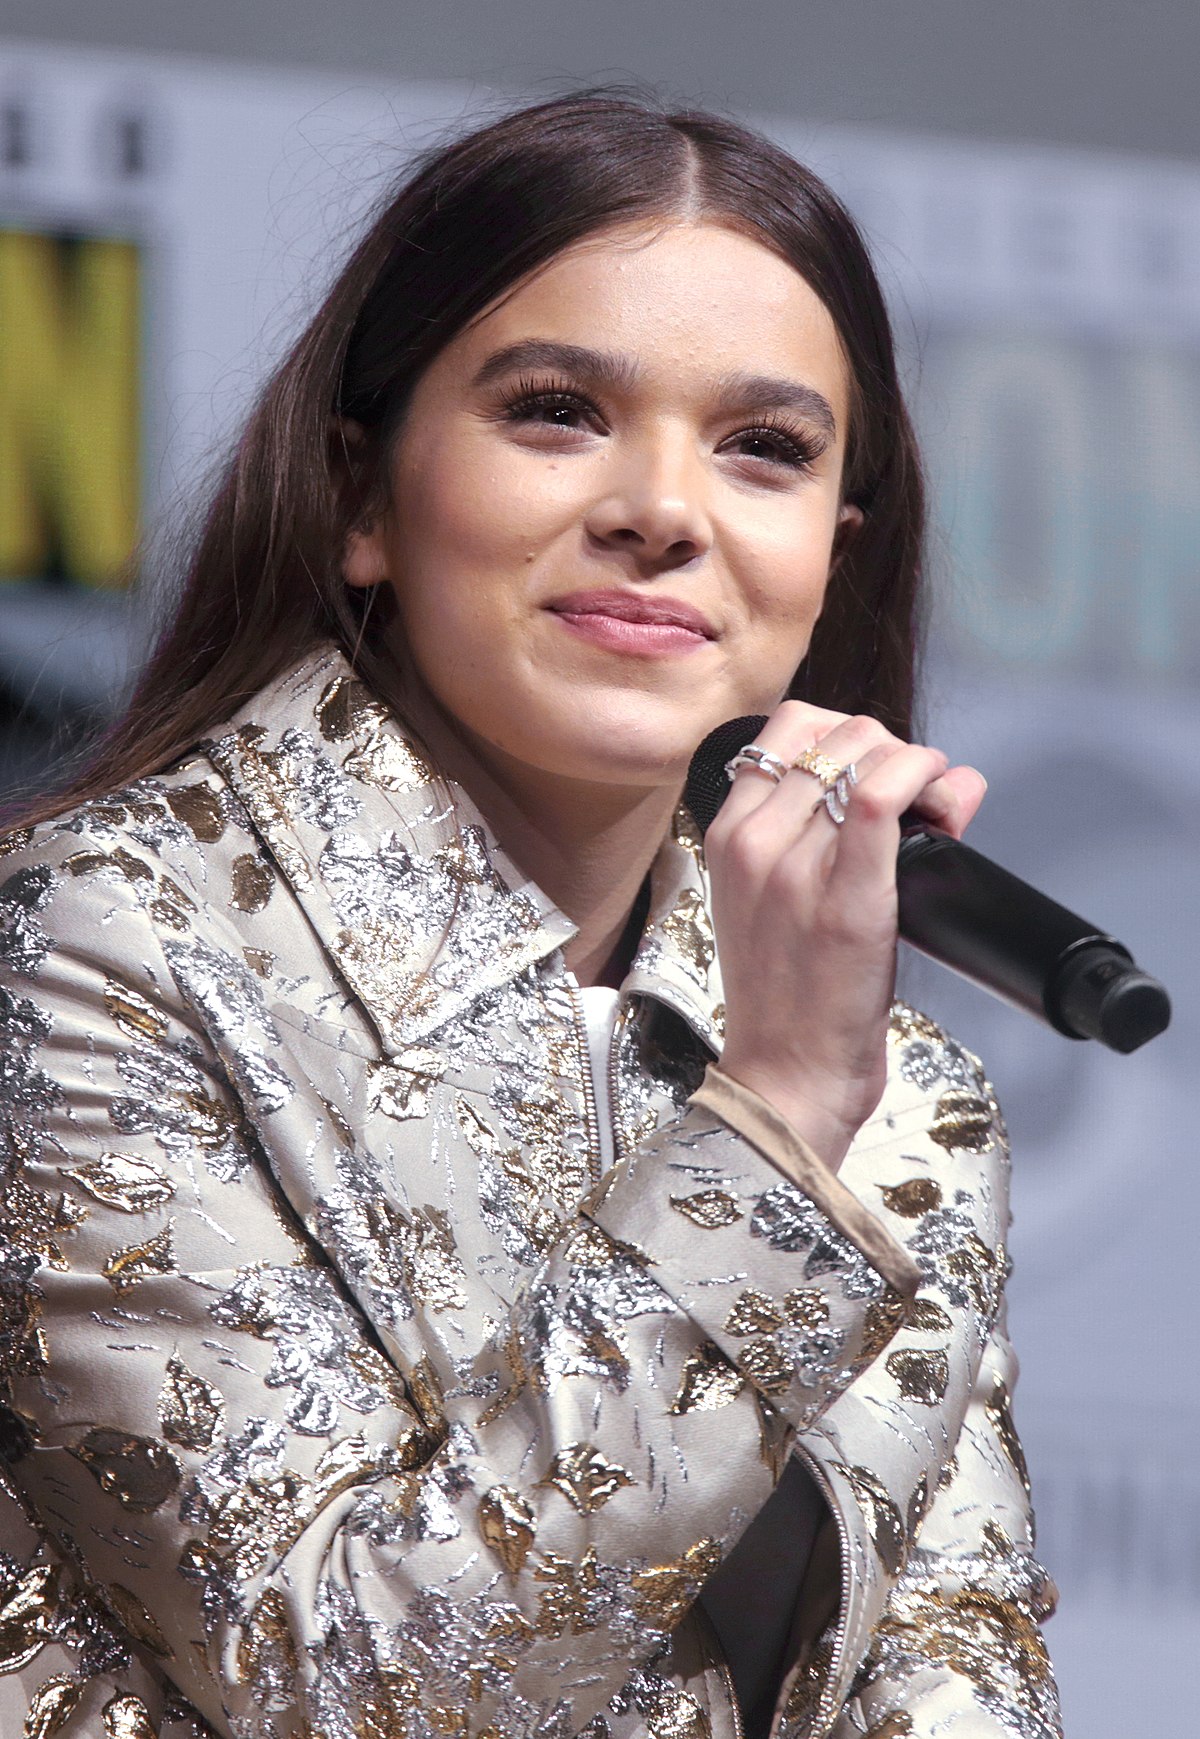 30 Interesting Things Most People Don’t Know About Hailee Steinfeld